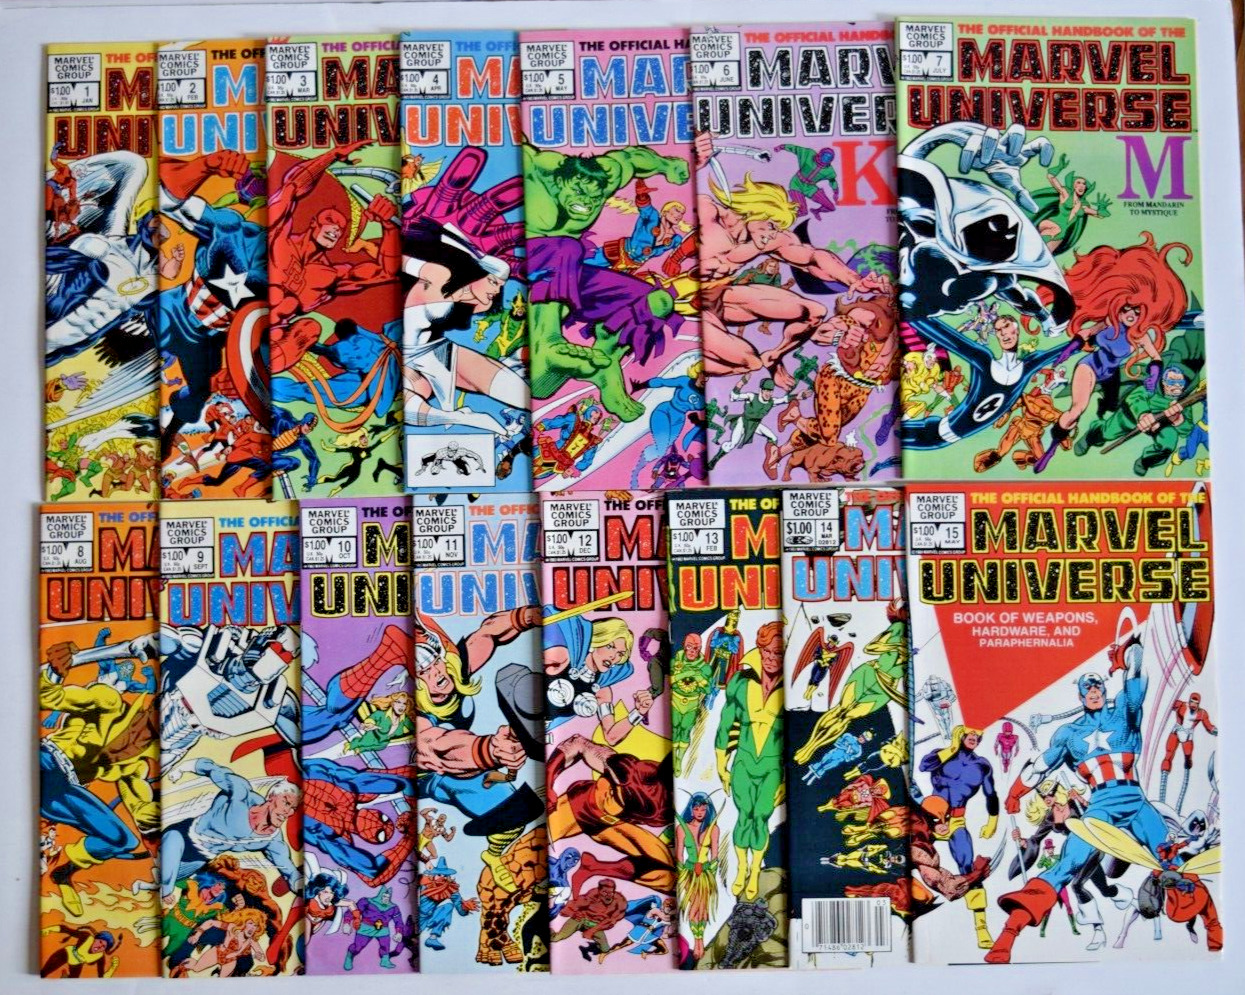 OFFICIAL HANDBOOK OF THE MARVEL UNIVERSE (1983) 15 ISSUE COMPLETE SET #1-15